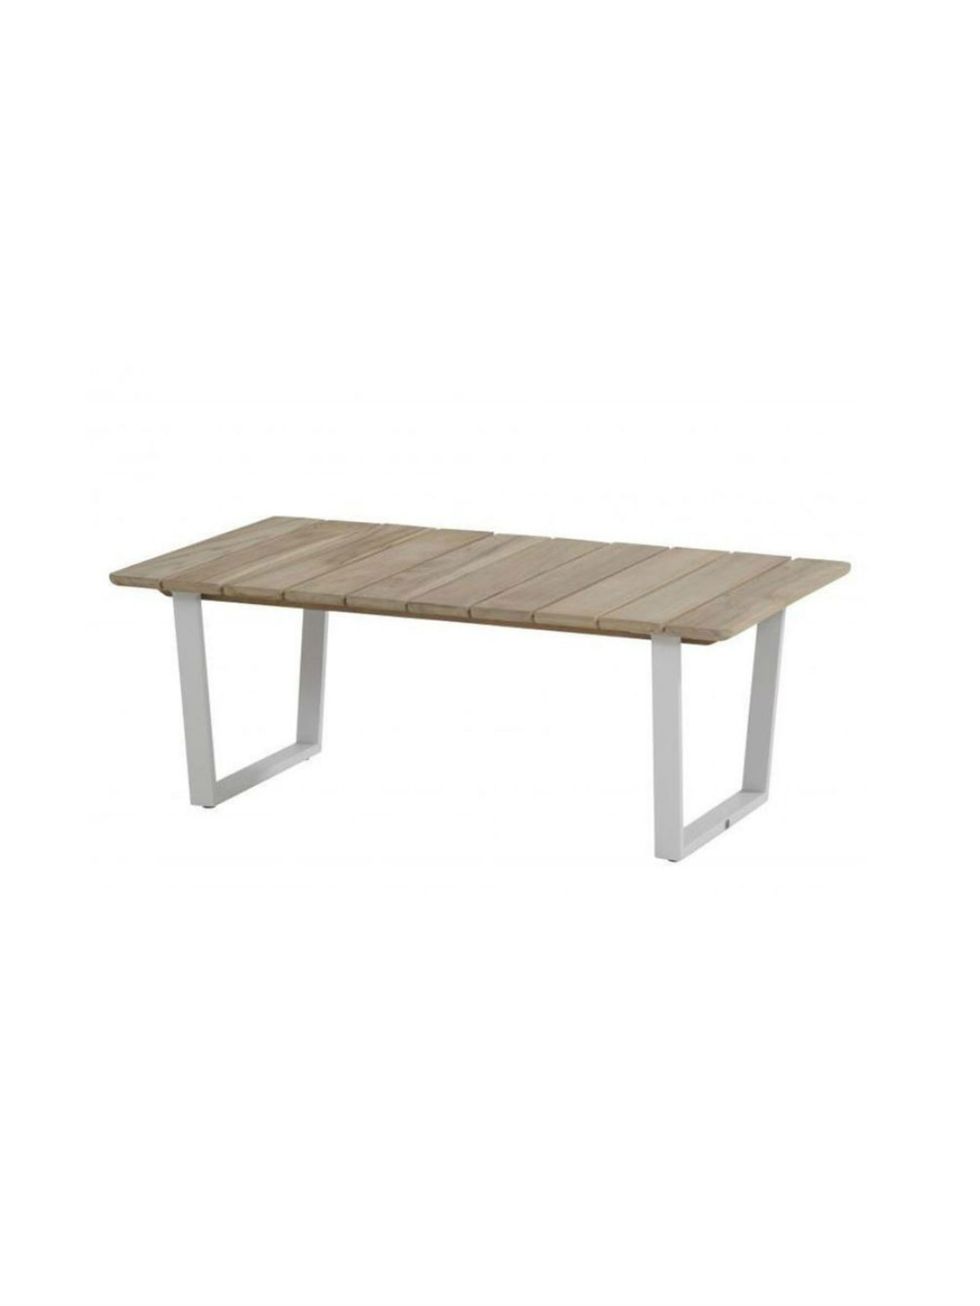 Wood, Table, Furniture, Outdoor furniture, Rectangle, Hardwood, Grey, Beige, Wood stain, Coffee table, 